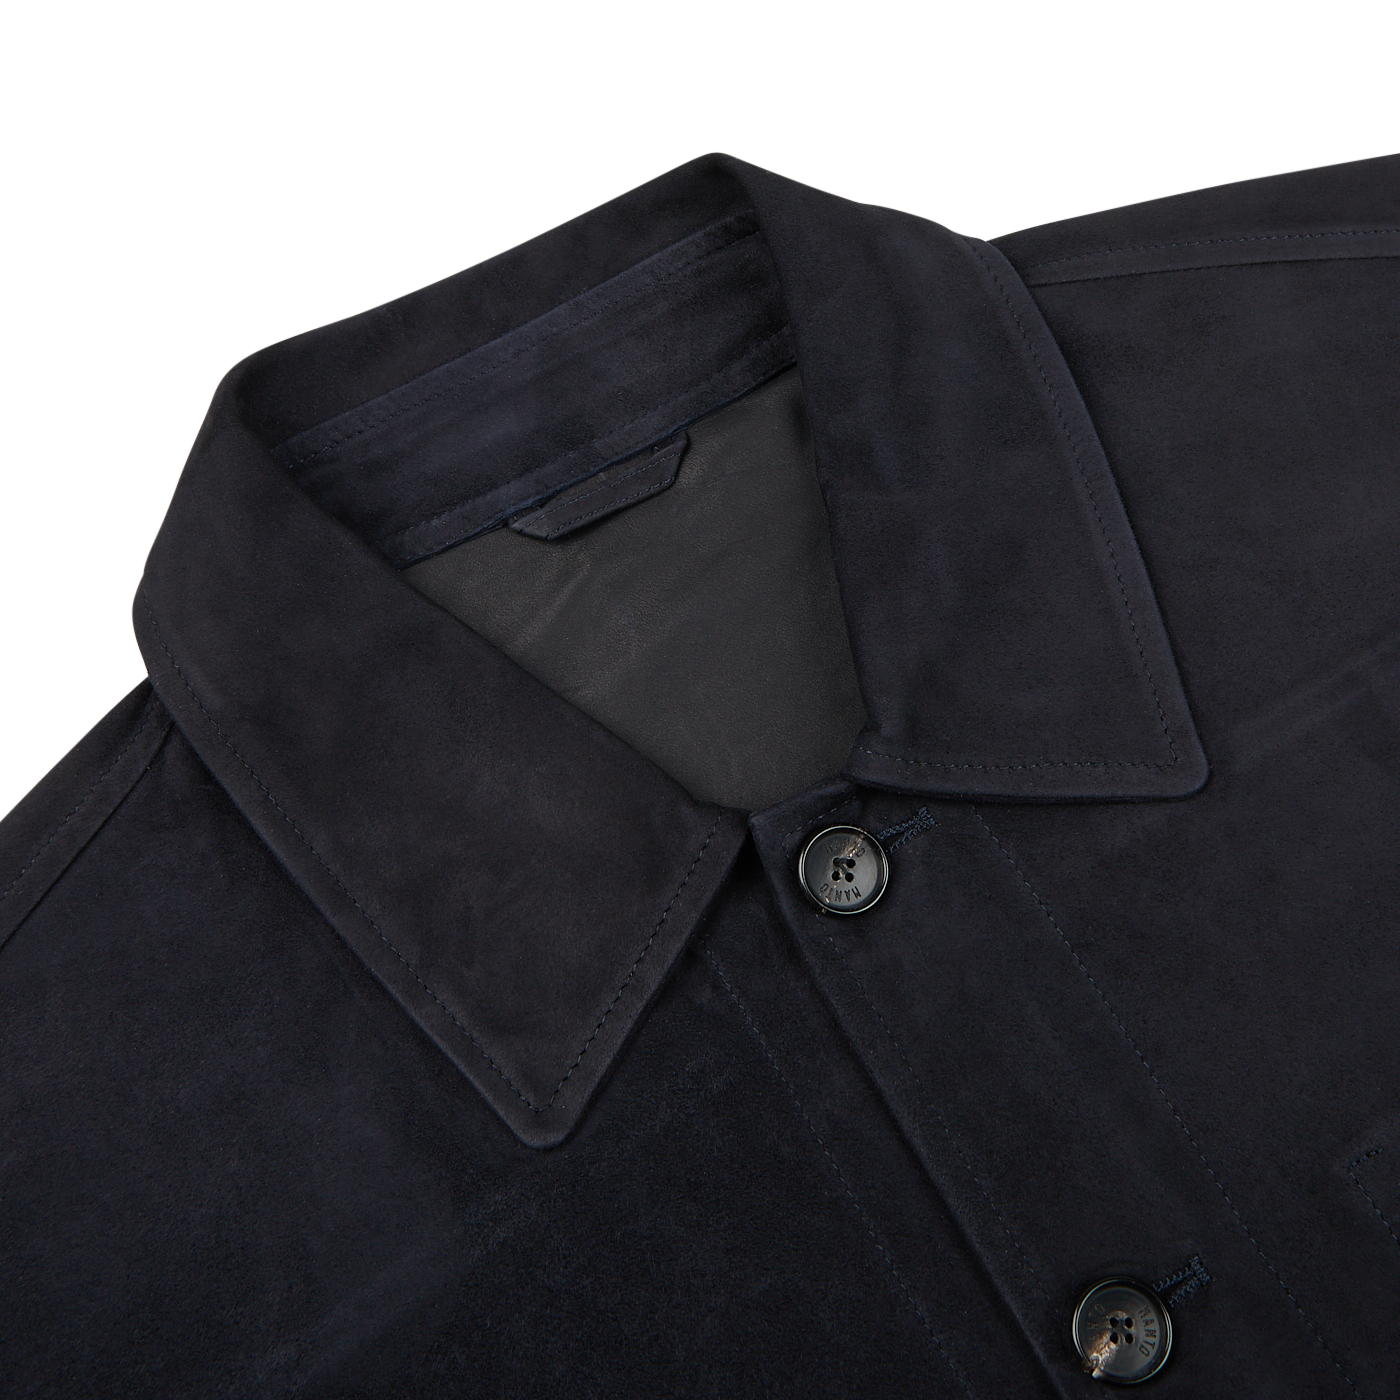 A close up of a Manto navy blue suede leather overshirt.